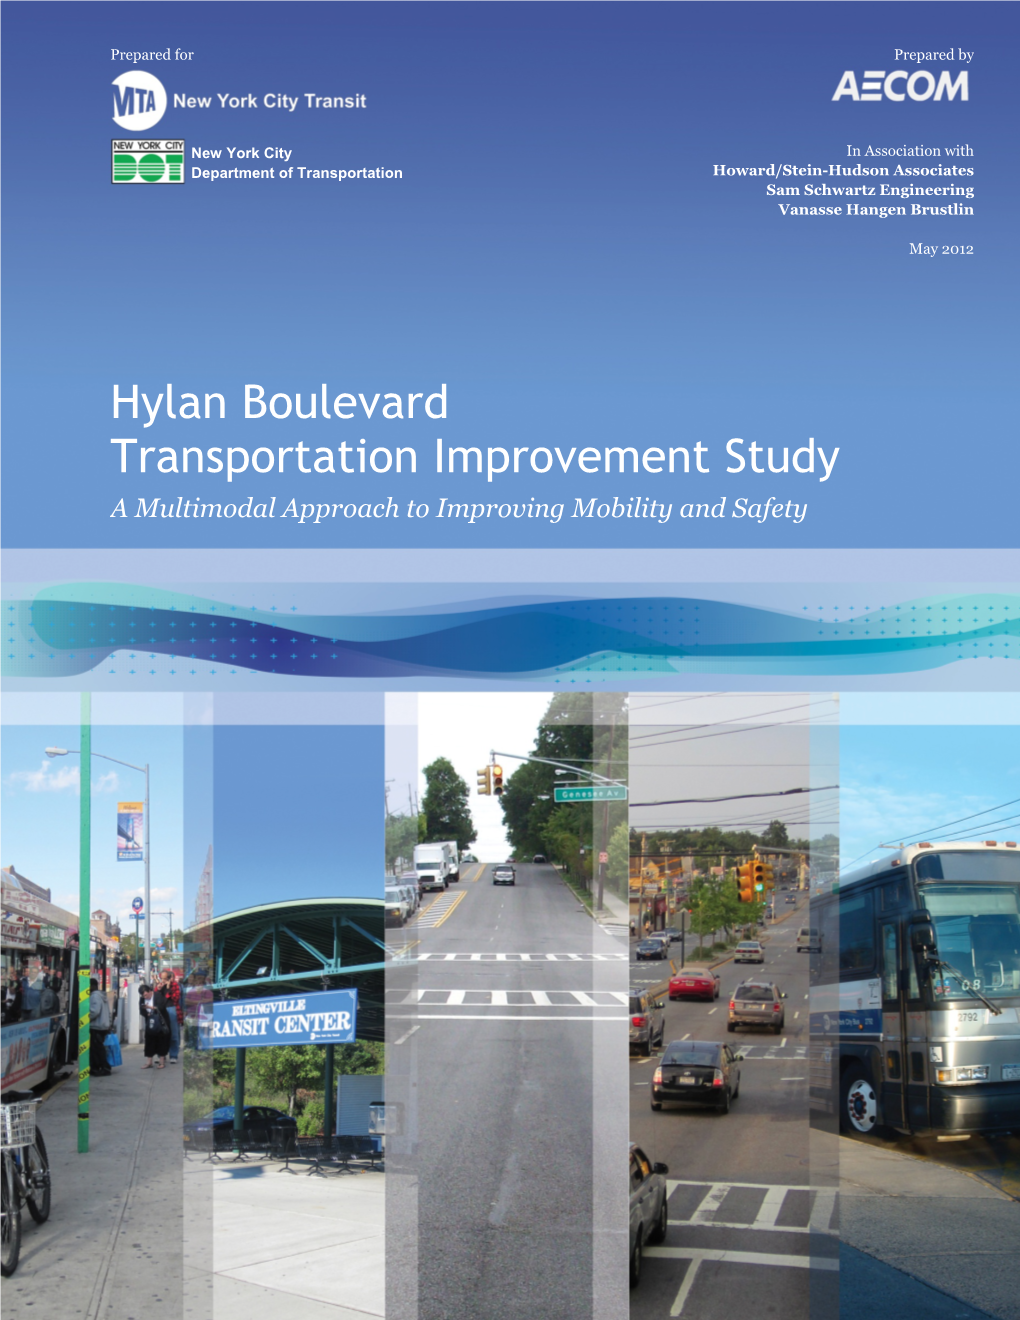 Hylan Boulevard Transportation Improvement Study a Multimodal Approach to Improving Mobility and Safety